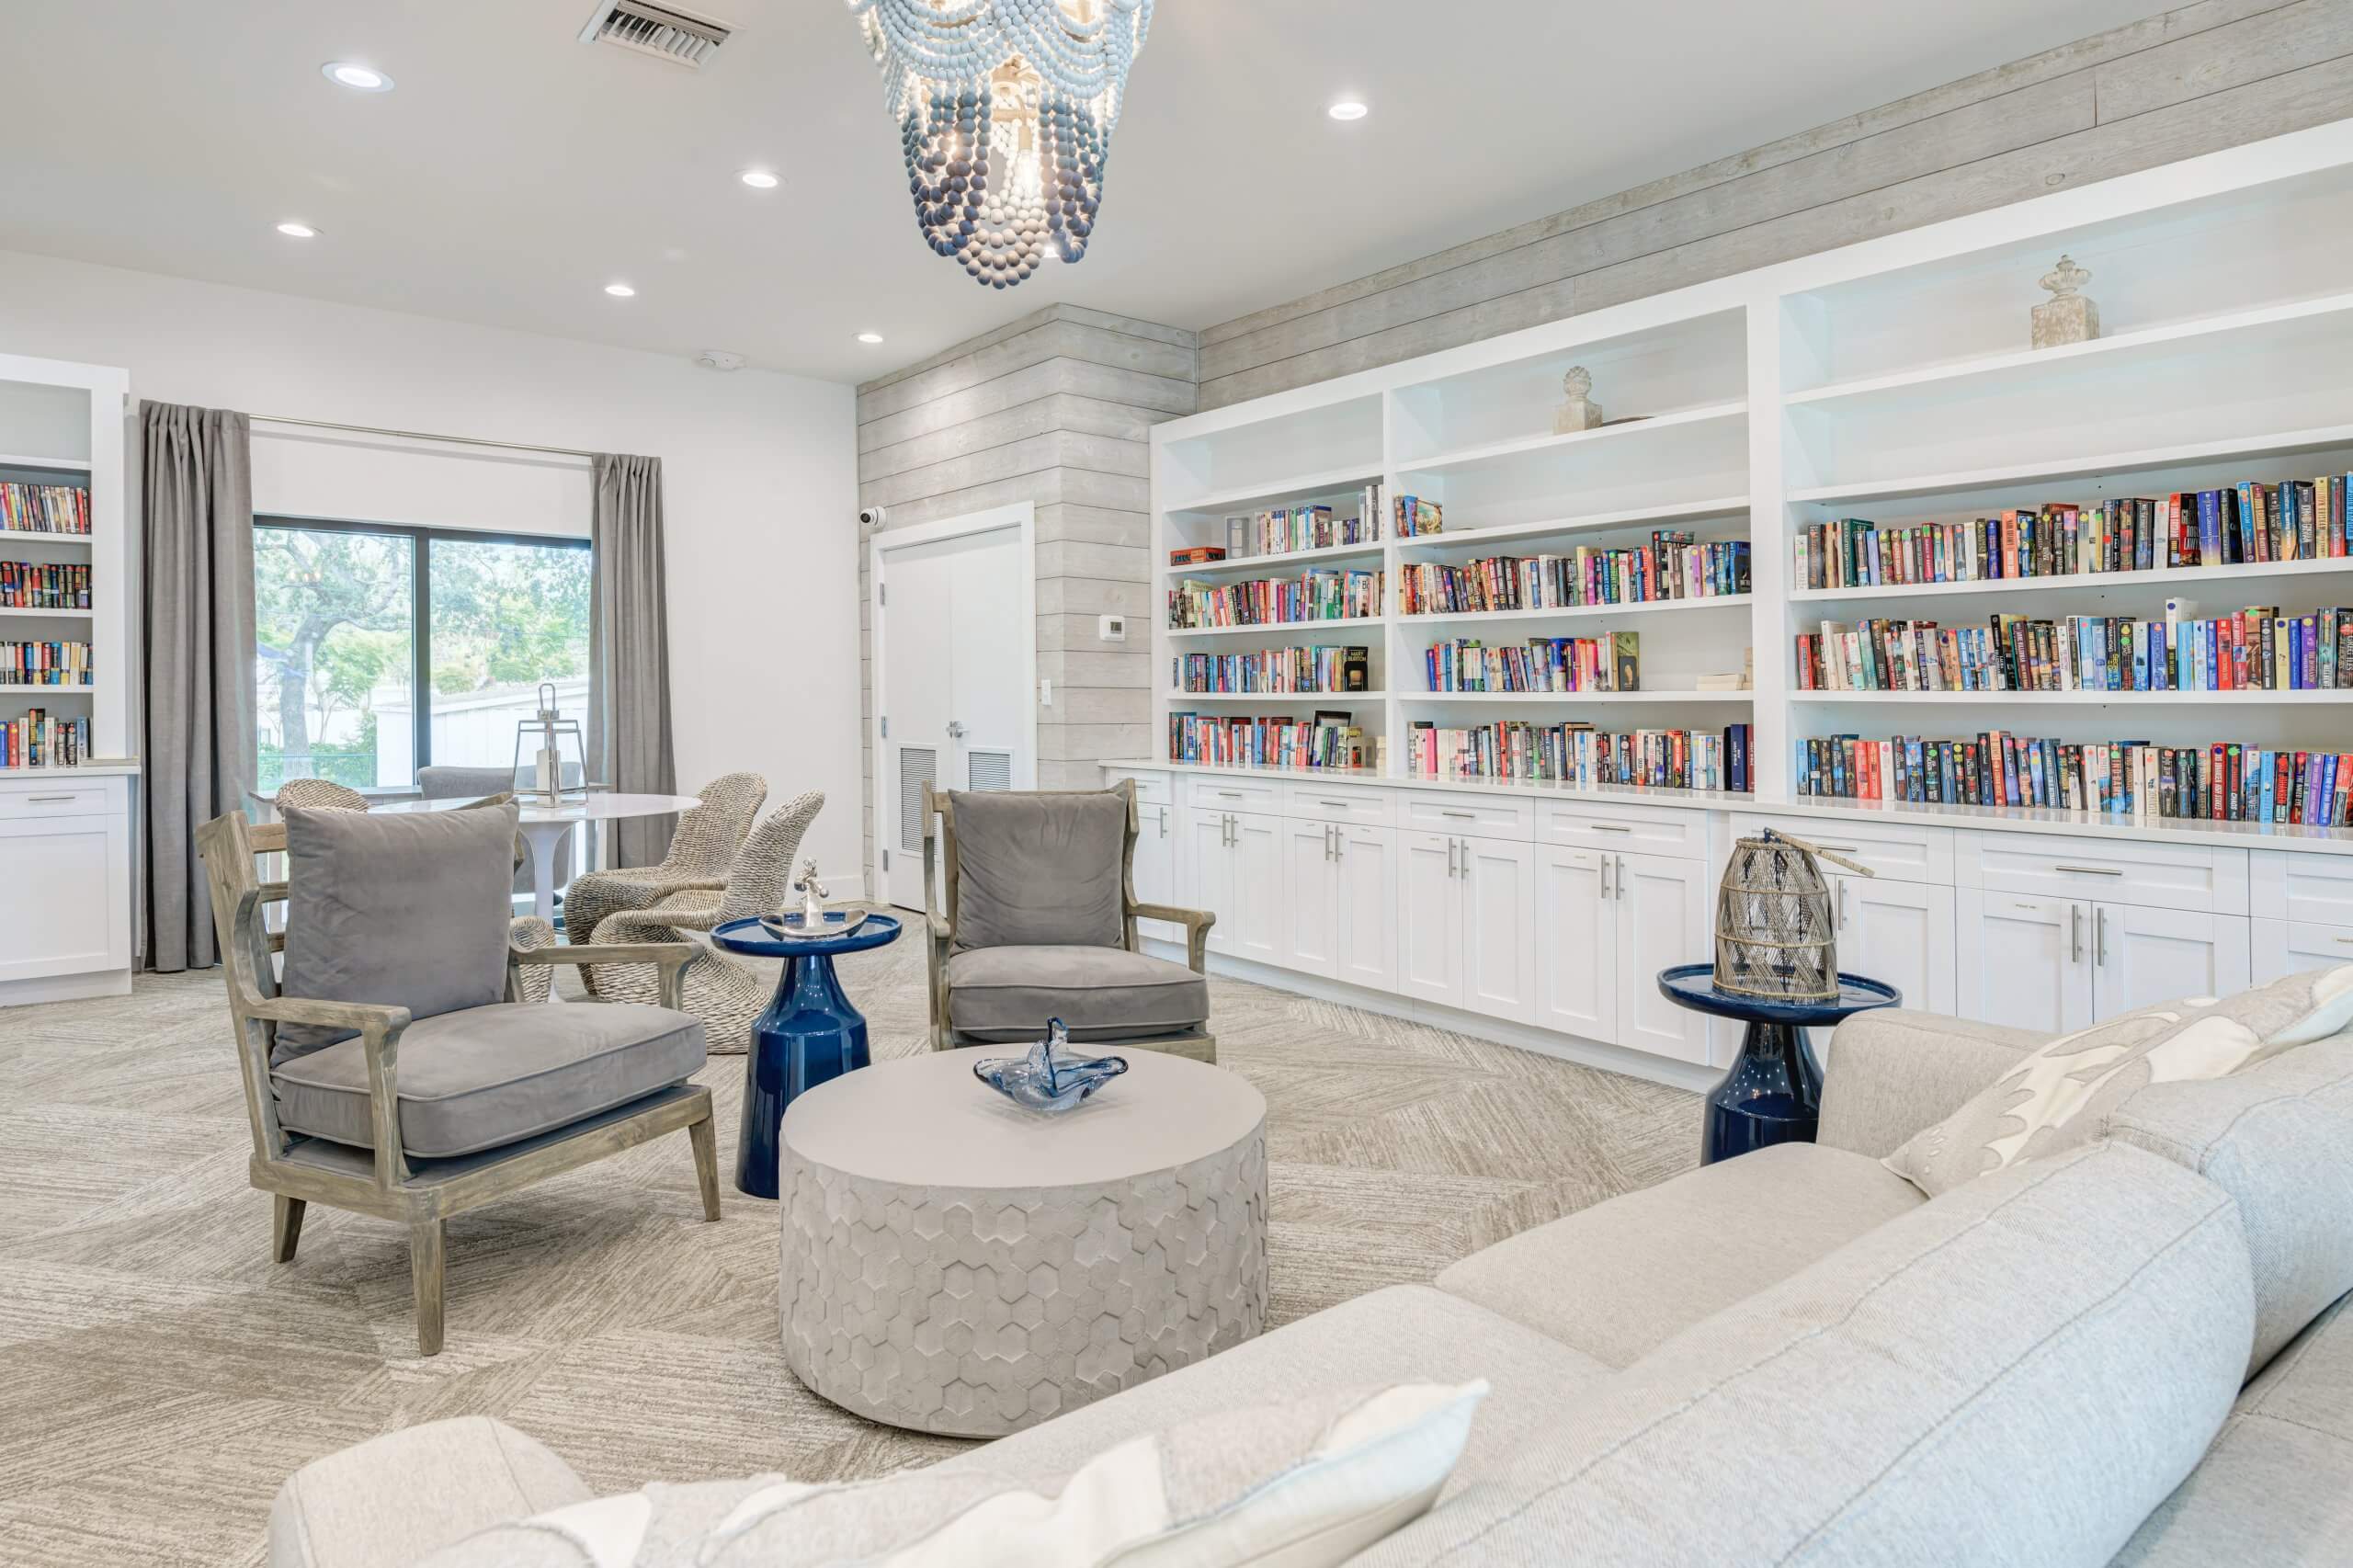 Bright living room with a gray sectional couch, two plush armchairs, a white built-in bookshelf filled with books, and a chandelier.